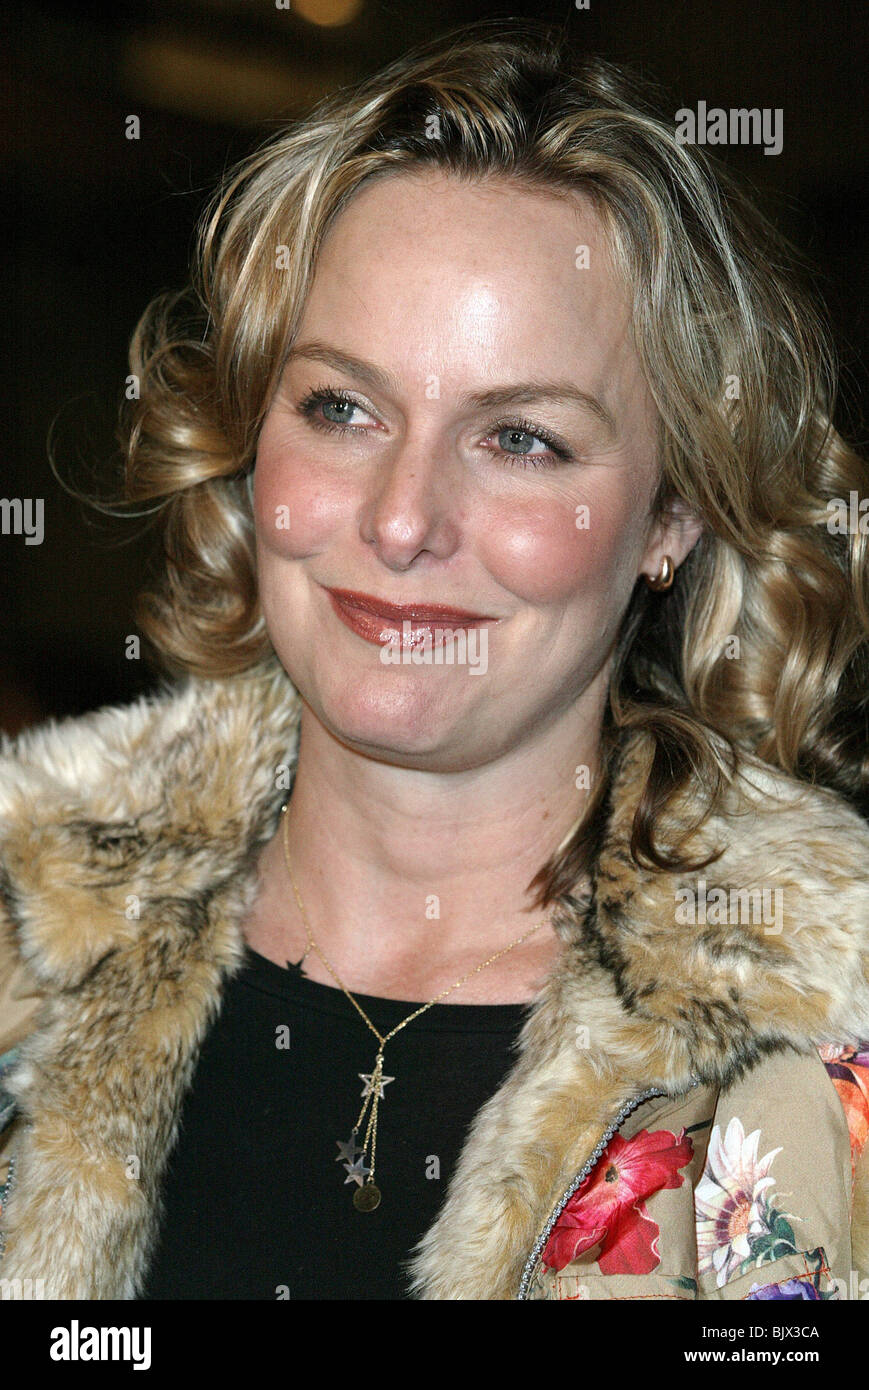 MELORA HARDEN DEADWOOD SEASON 2 PREMIERE CHINESE THEATRE HOLLYWOOD LOS ANGELES USA 03 March 2005 Stock Photo